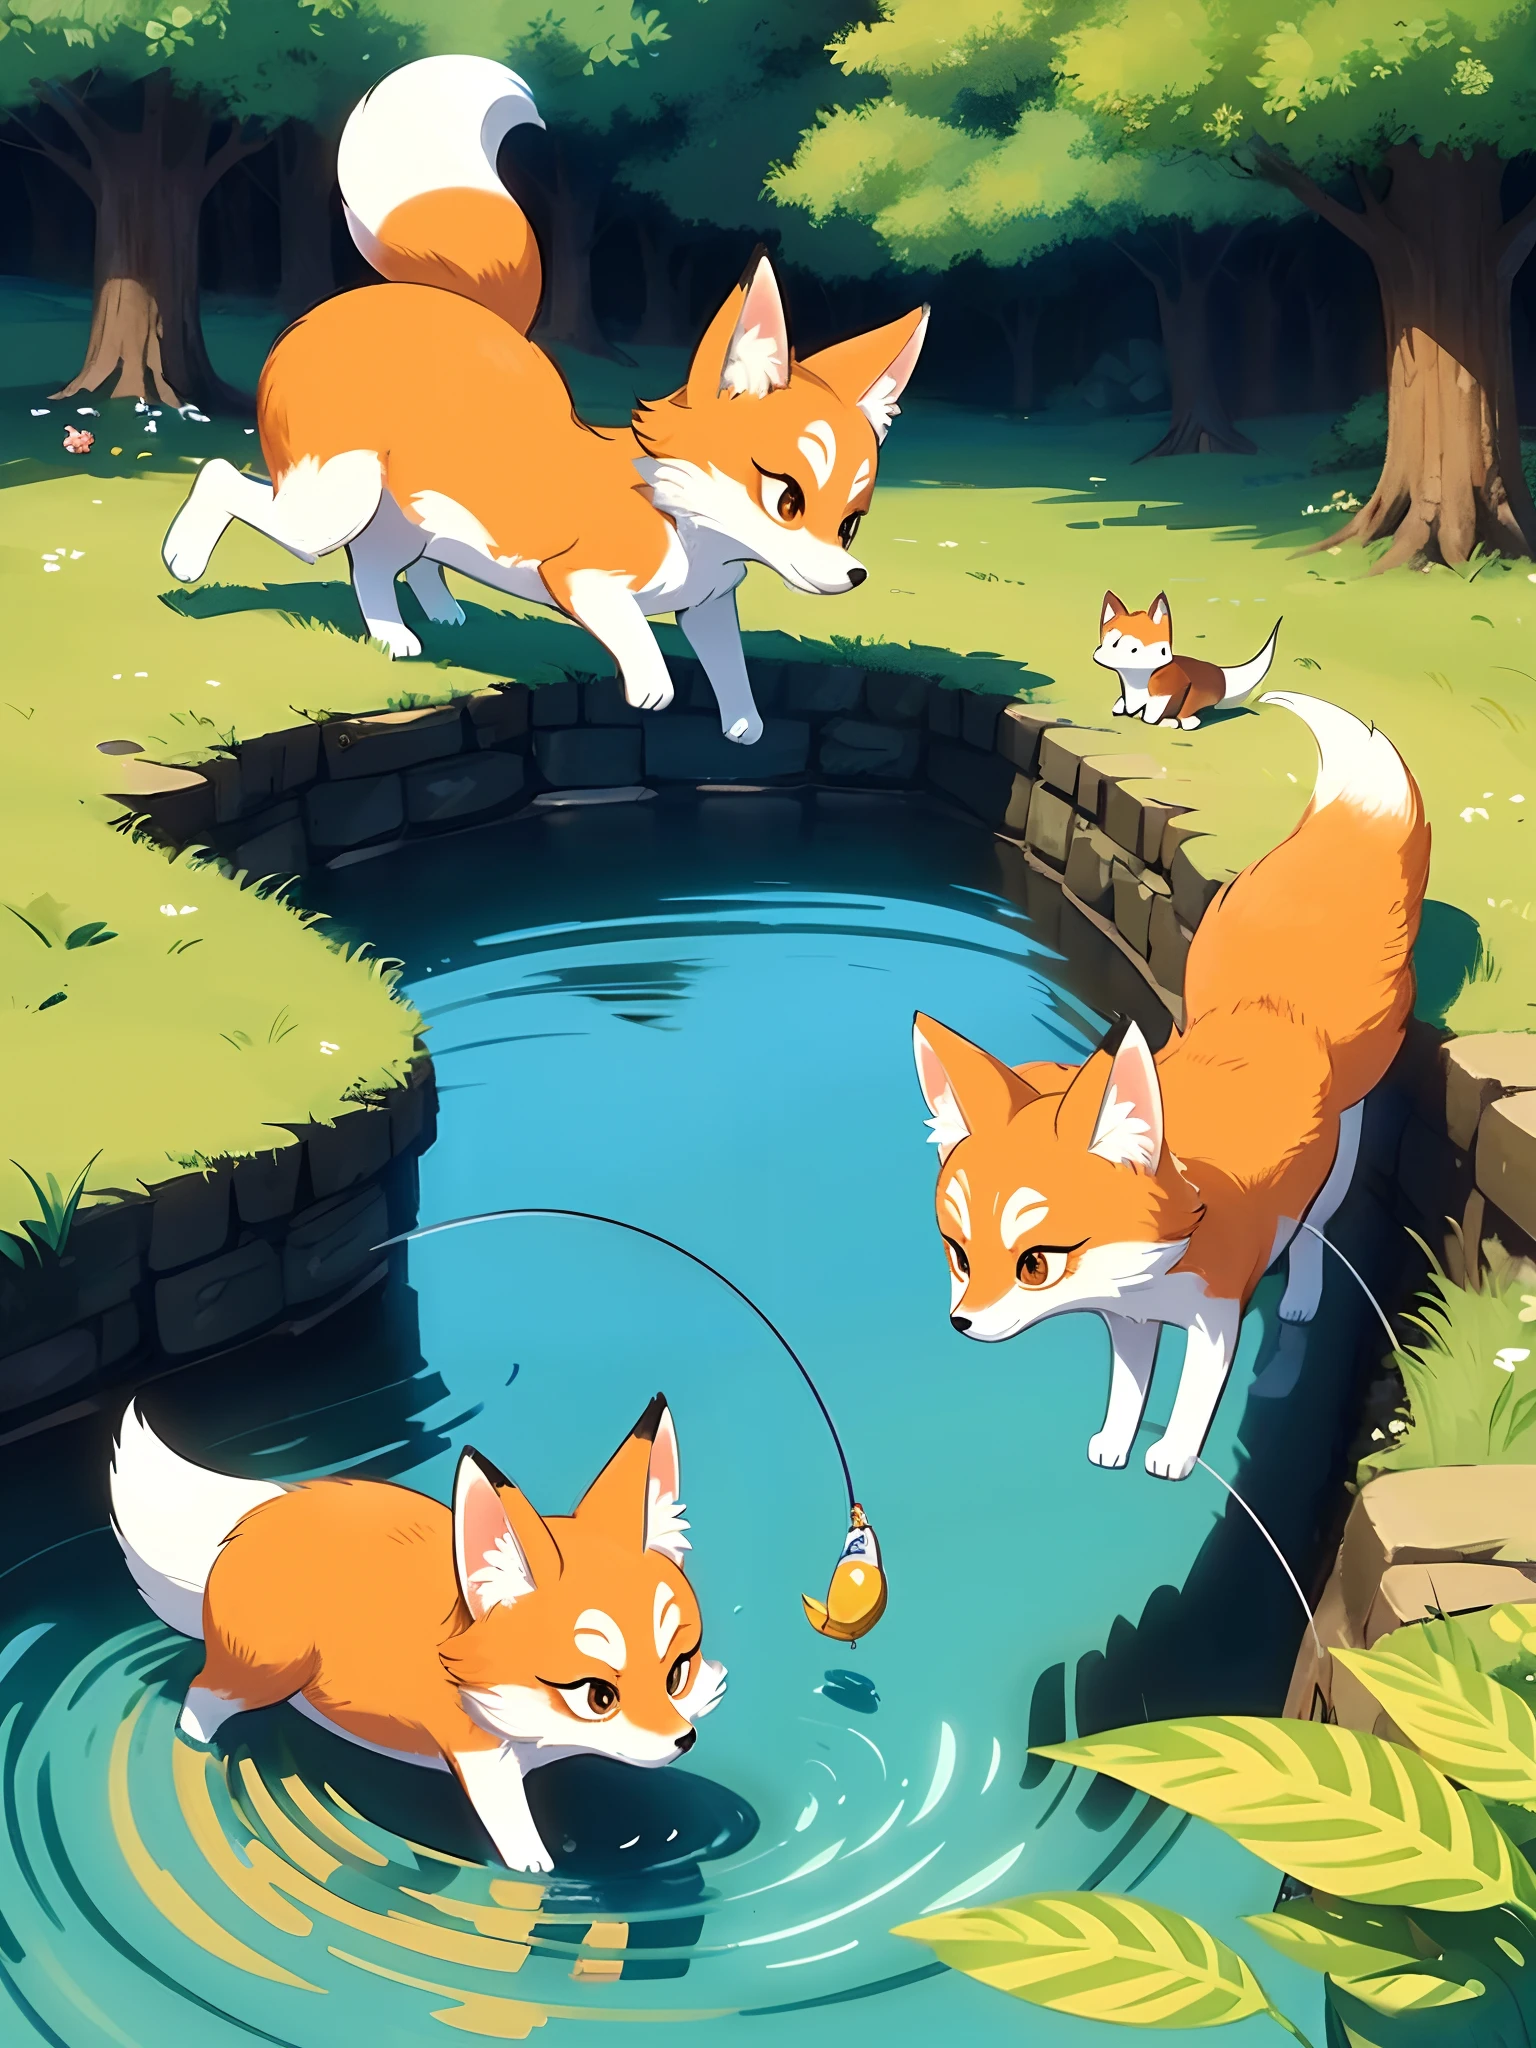 Above all，She meets Felix, A clever and witty little fox。Felix catches fish by the stream，His tail flicked around，Flexible as a snake，Disney  style，Animate，Cartoony